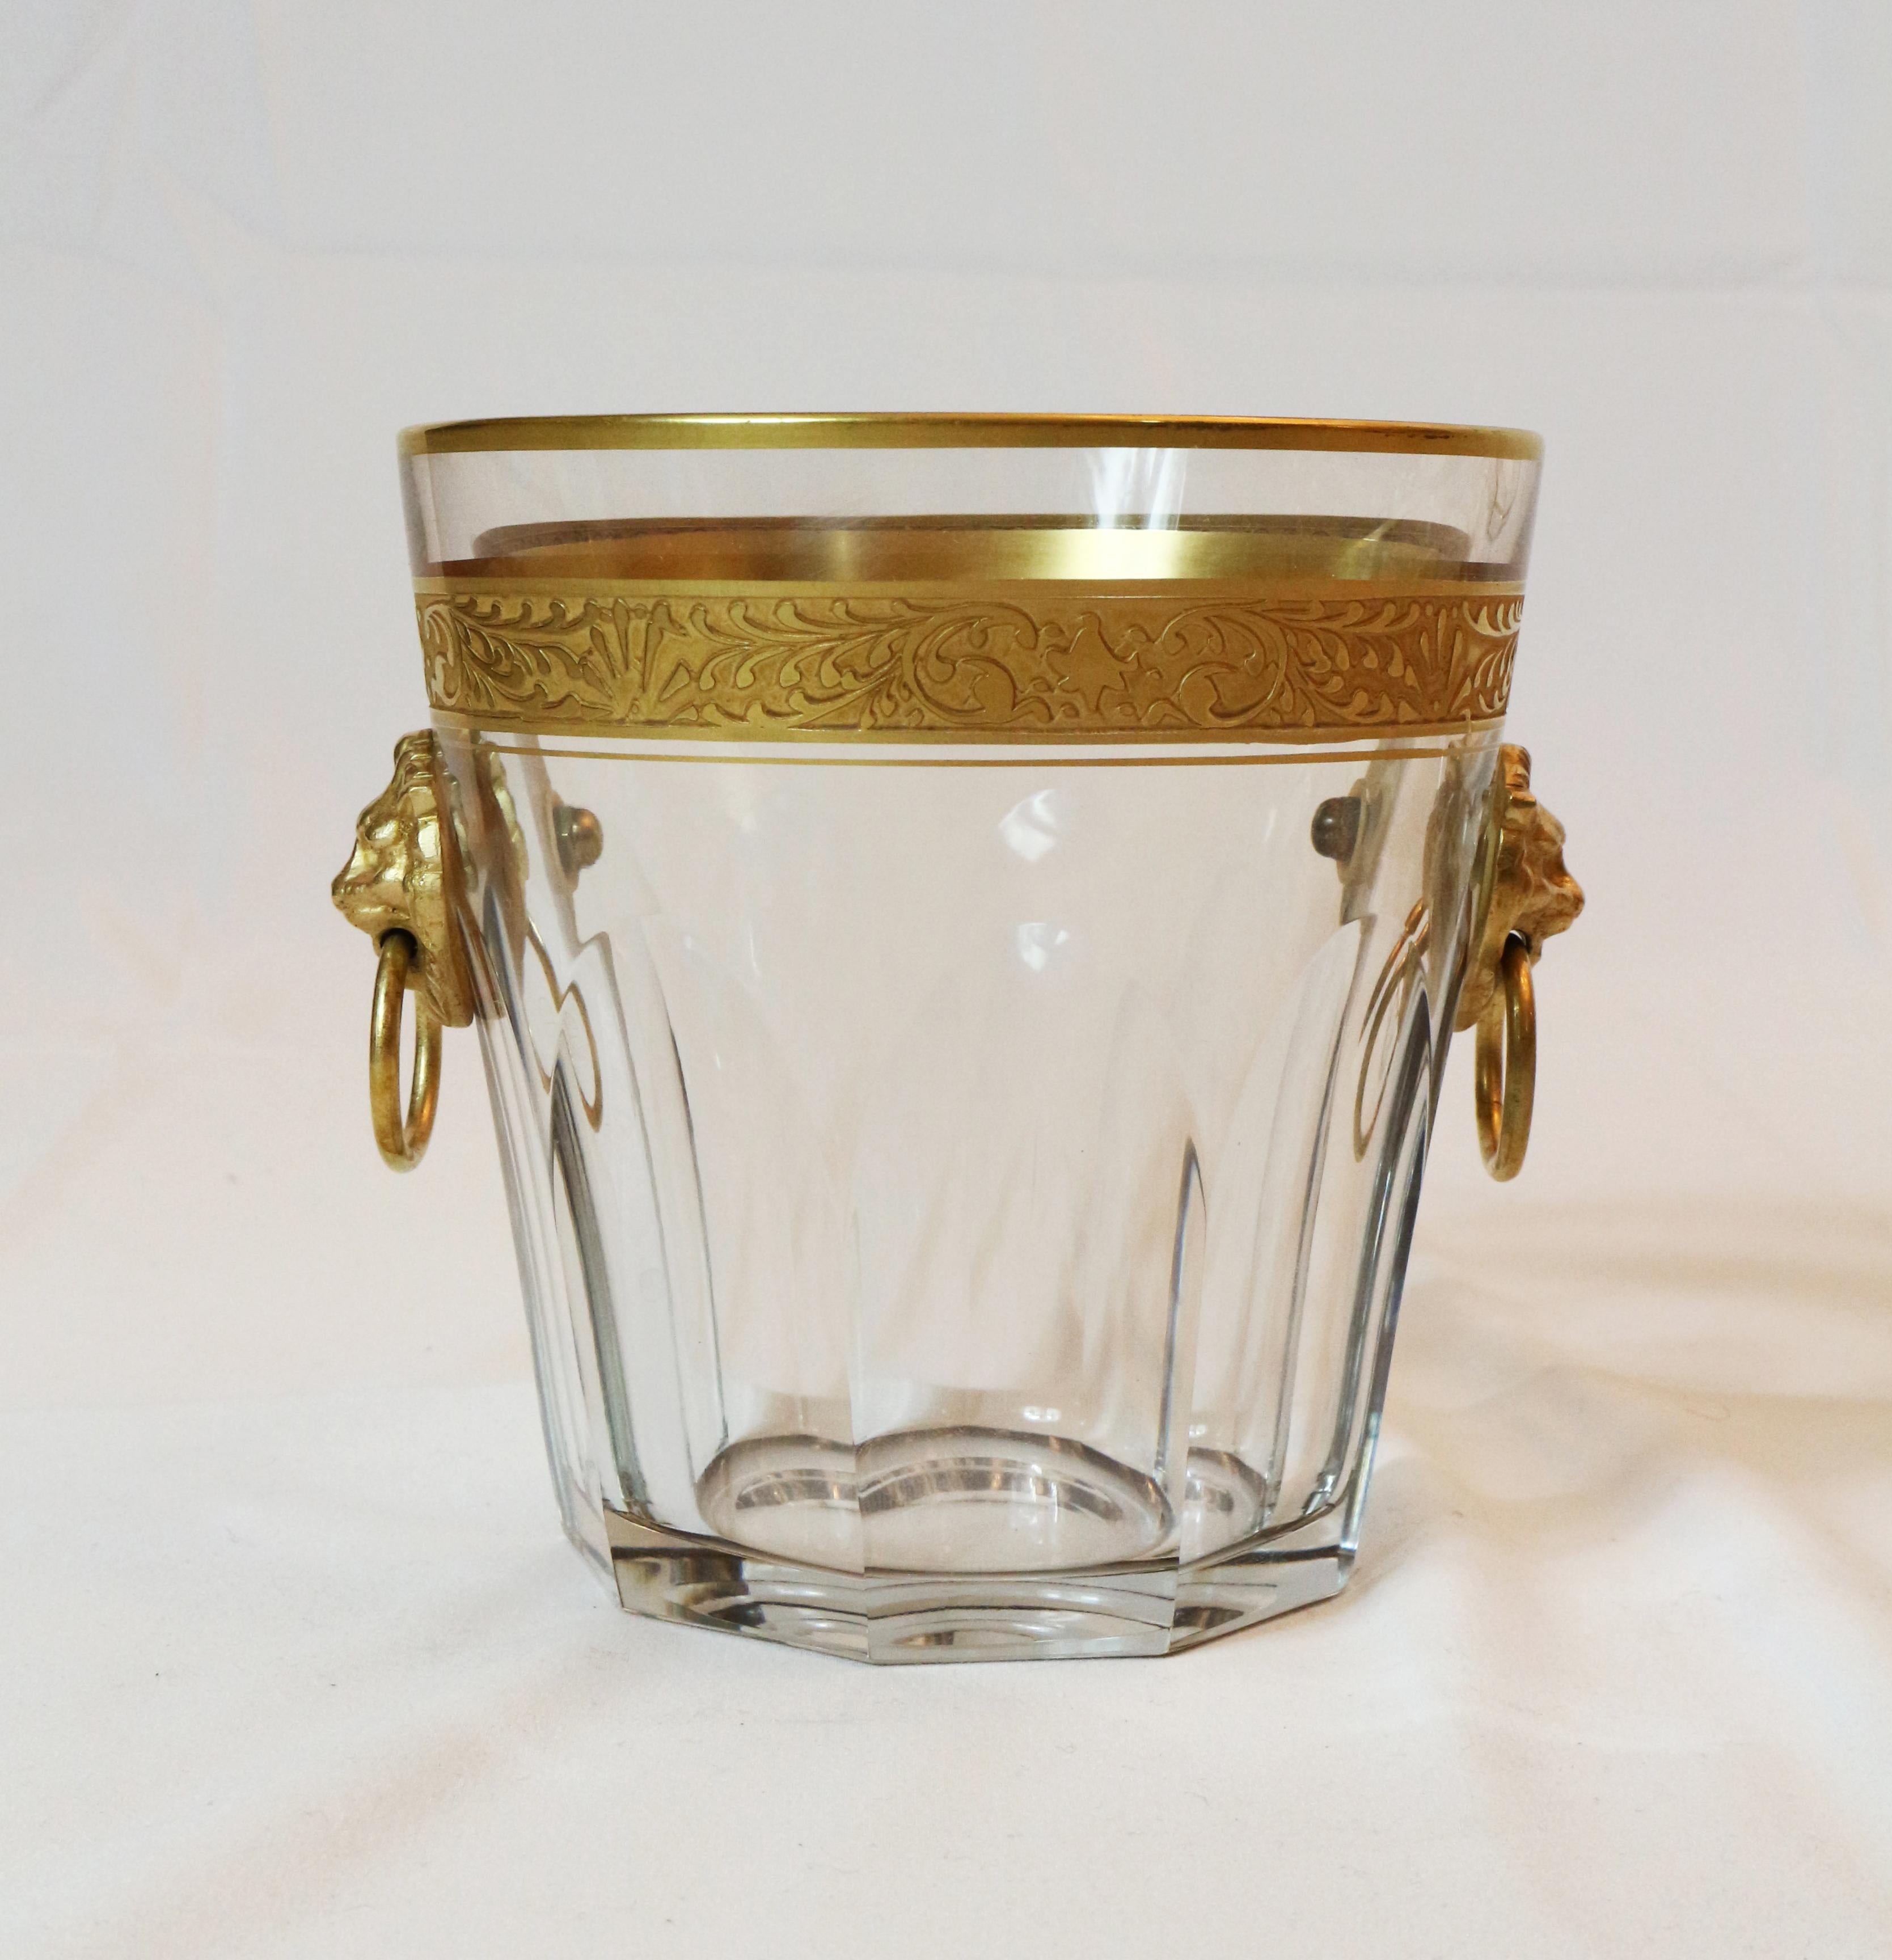 Baccarat elegant cut crystal ice bucket with  24-carat gold and bronze gilded lions, unsigned
Measures: Height 13 cm, diameter 12.5 cm.